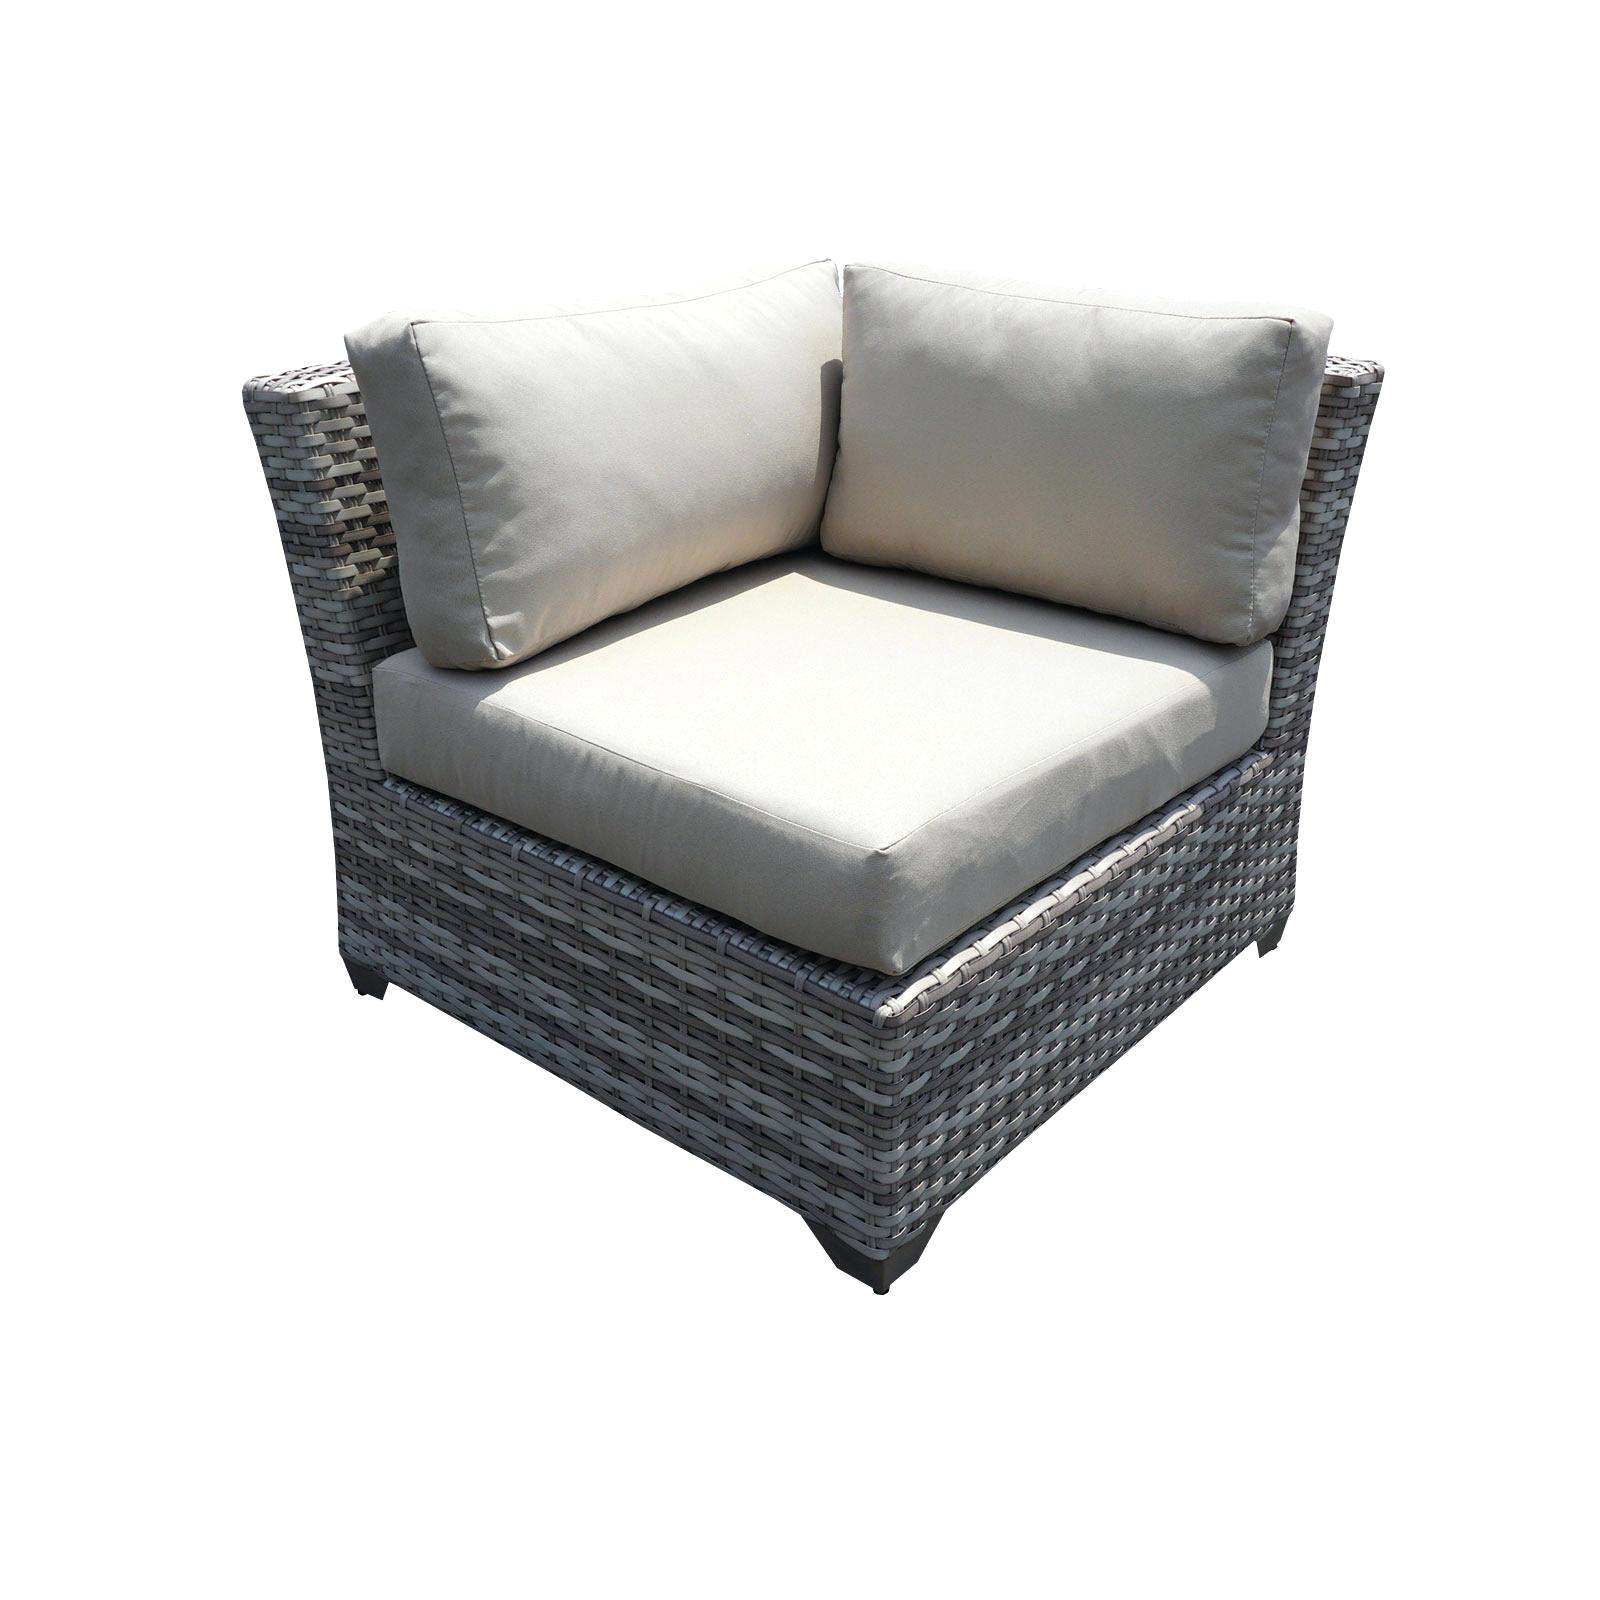 chair wicker outdoor sofa 0d patio chairs sale replacement cushions ideas of outdoor furniture seat cushions